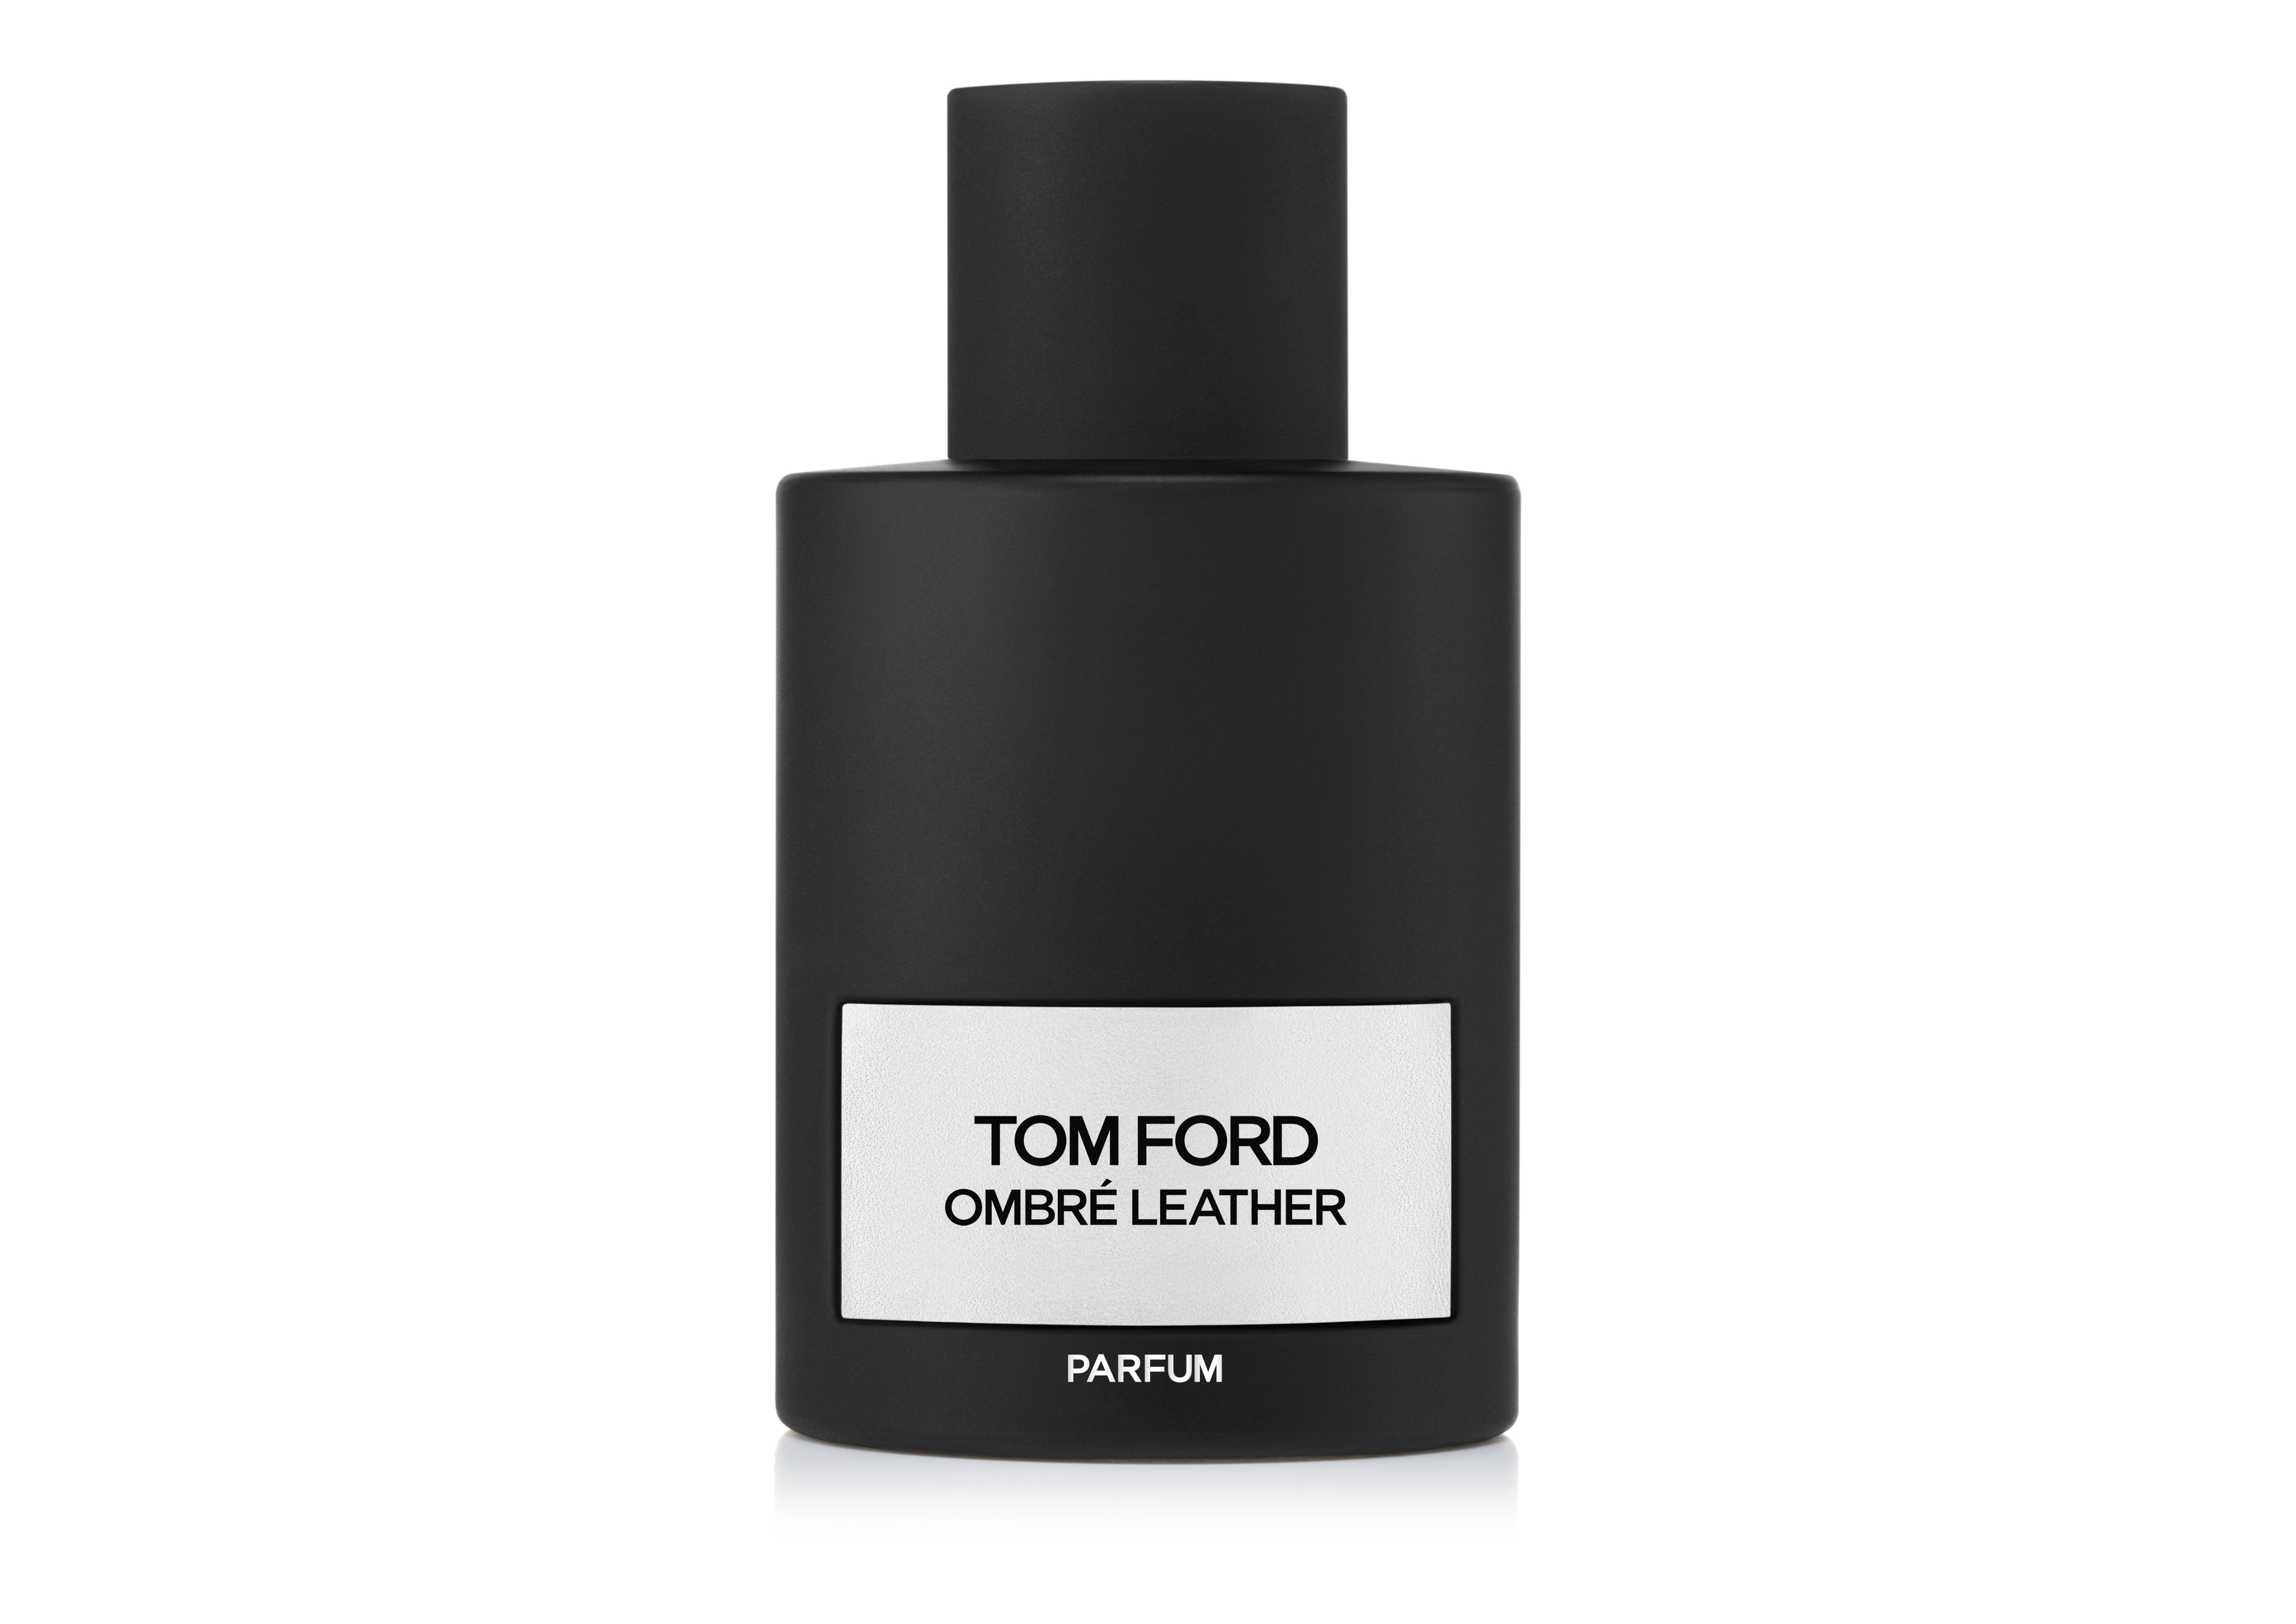 Tom Ford Beauty - Ombre Leather Parfum 100 ml, Nero 1, large image number 0